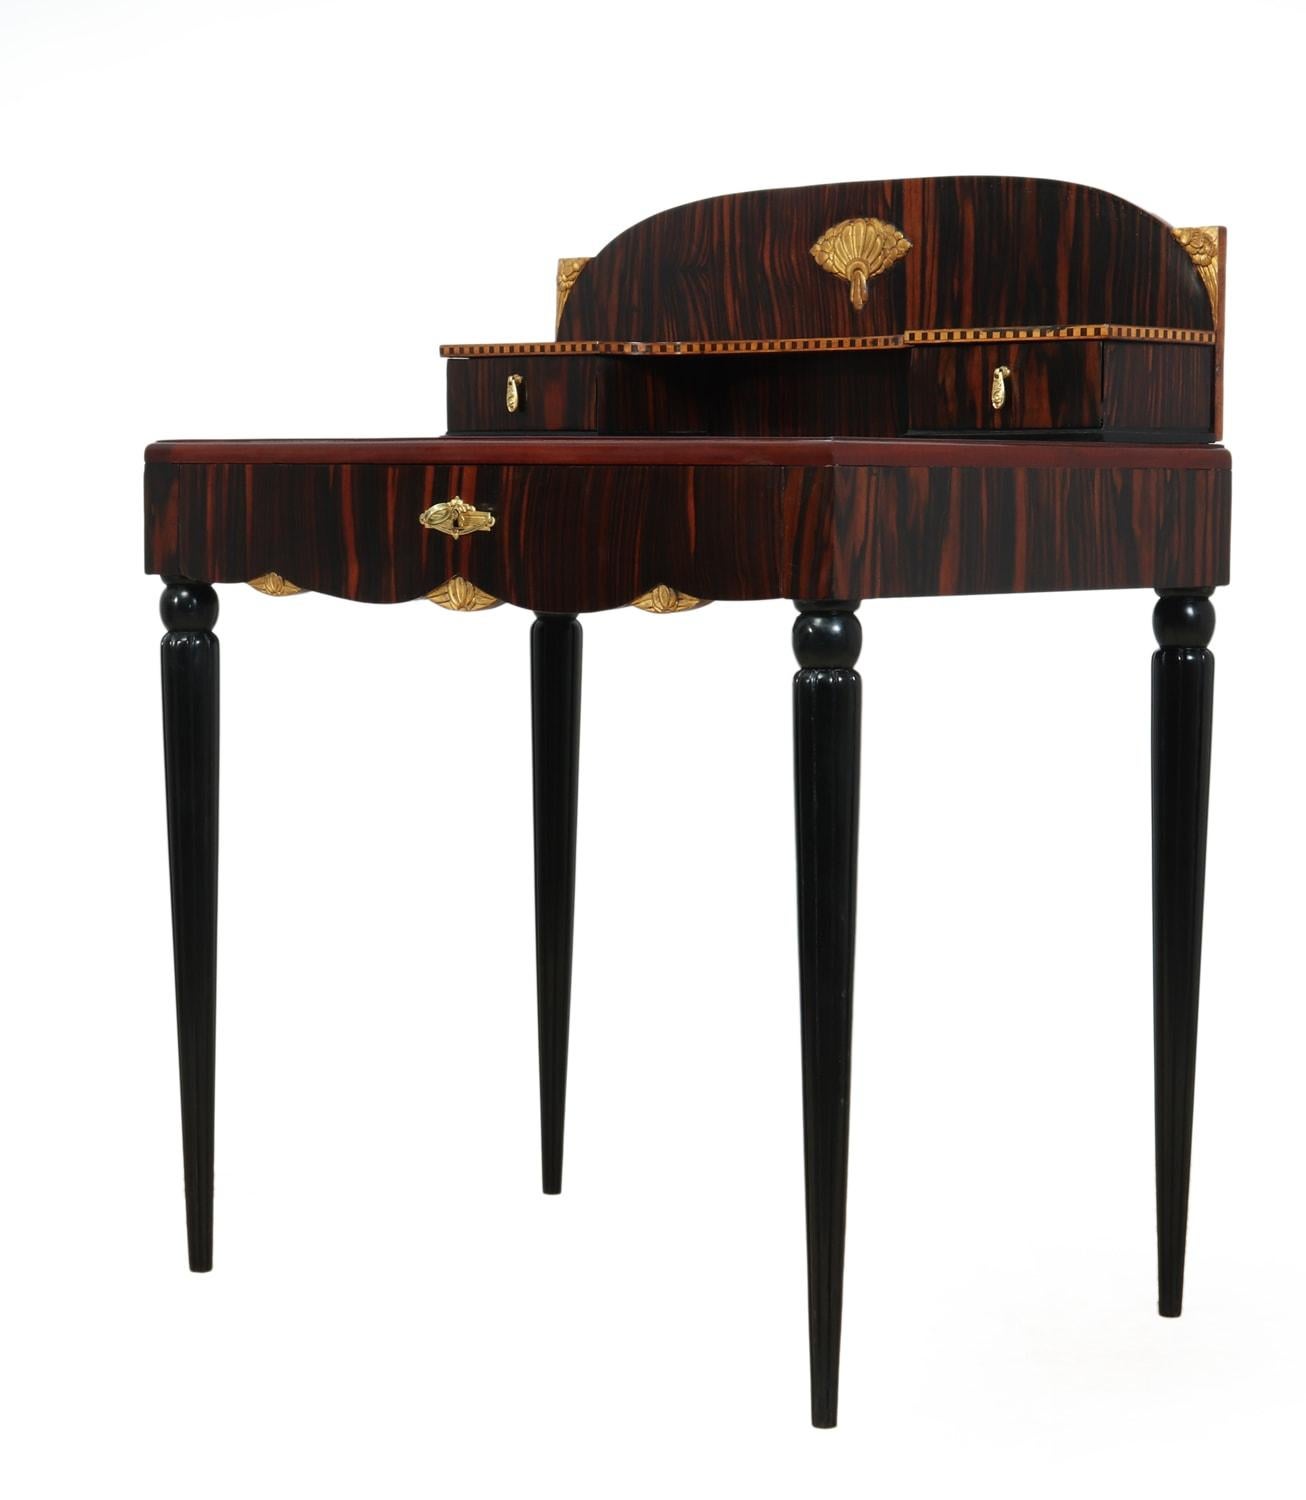 French Art Deco Macassar ebony and giltwood Bonheur du Jour

A bonheur du jour or ladies writing desk in Macassar ebony with gilt carving escutcheon and handles, ebonized legs that are tapered with reeded detail large central drawer that is